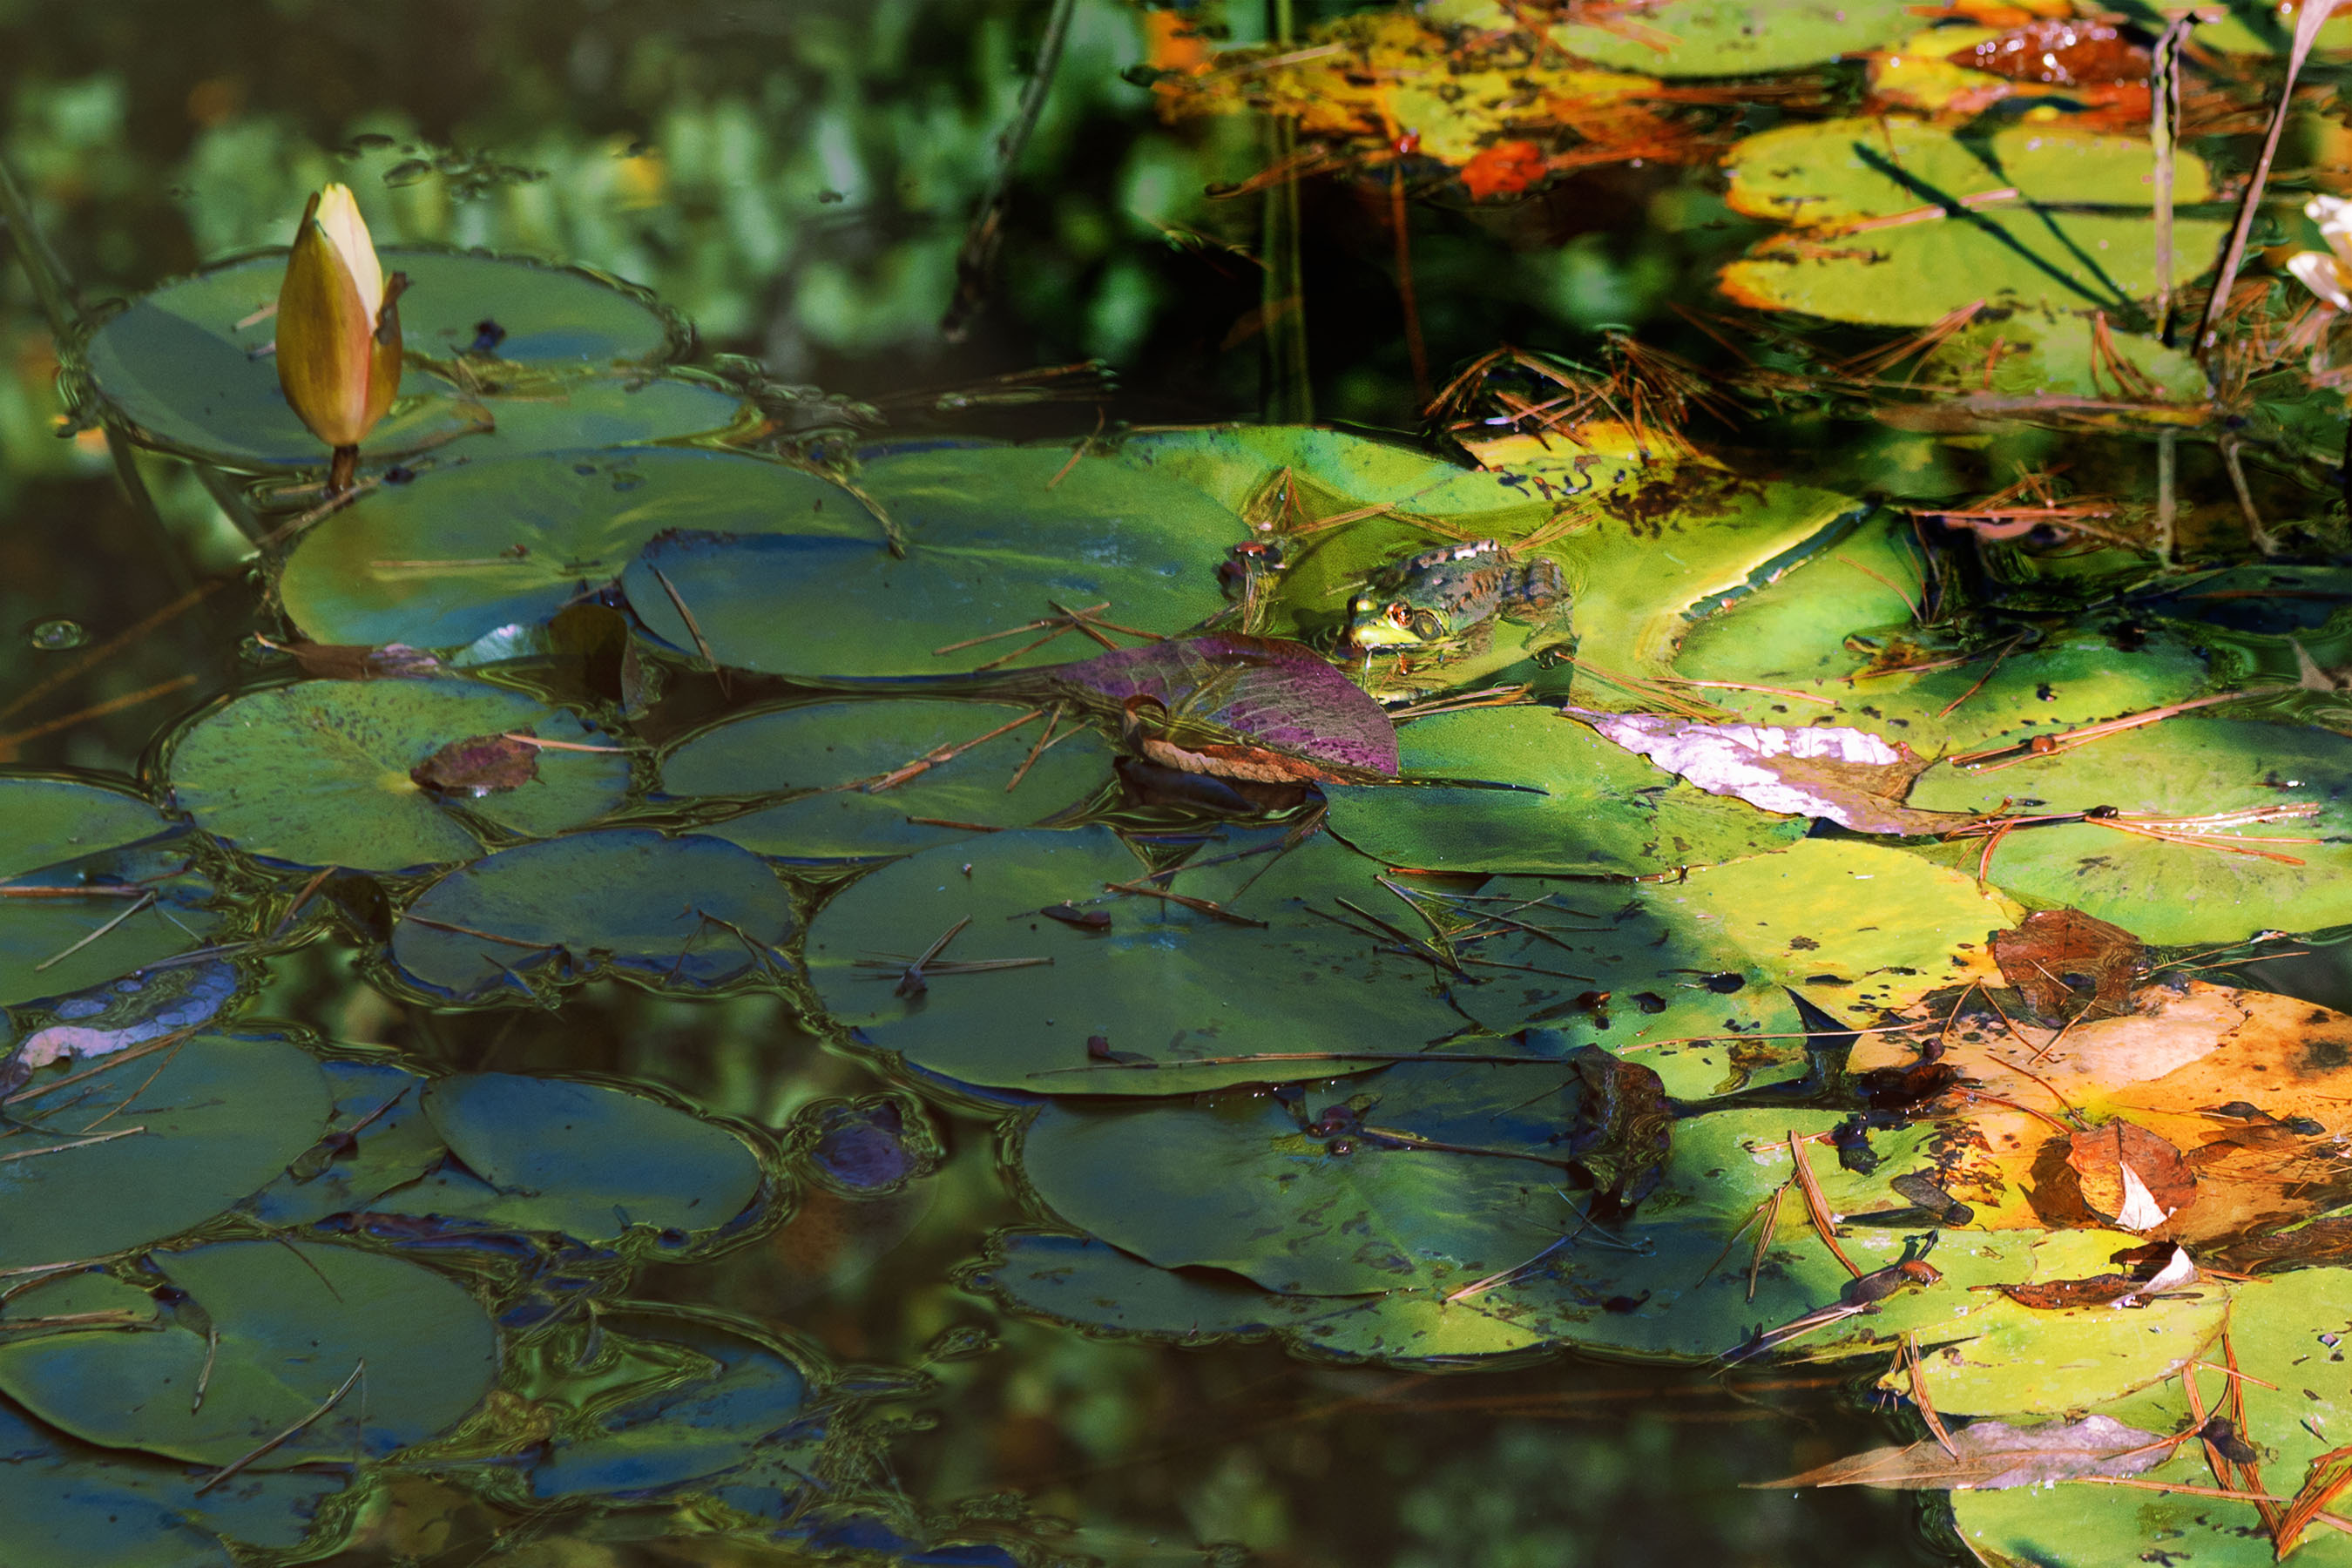 Frog on Lilly Pad by Richard White